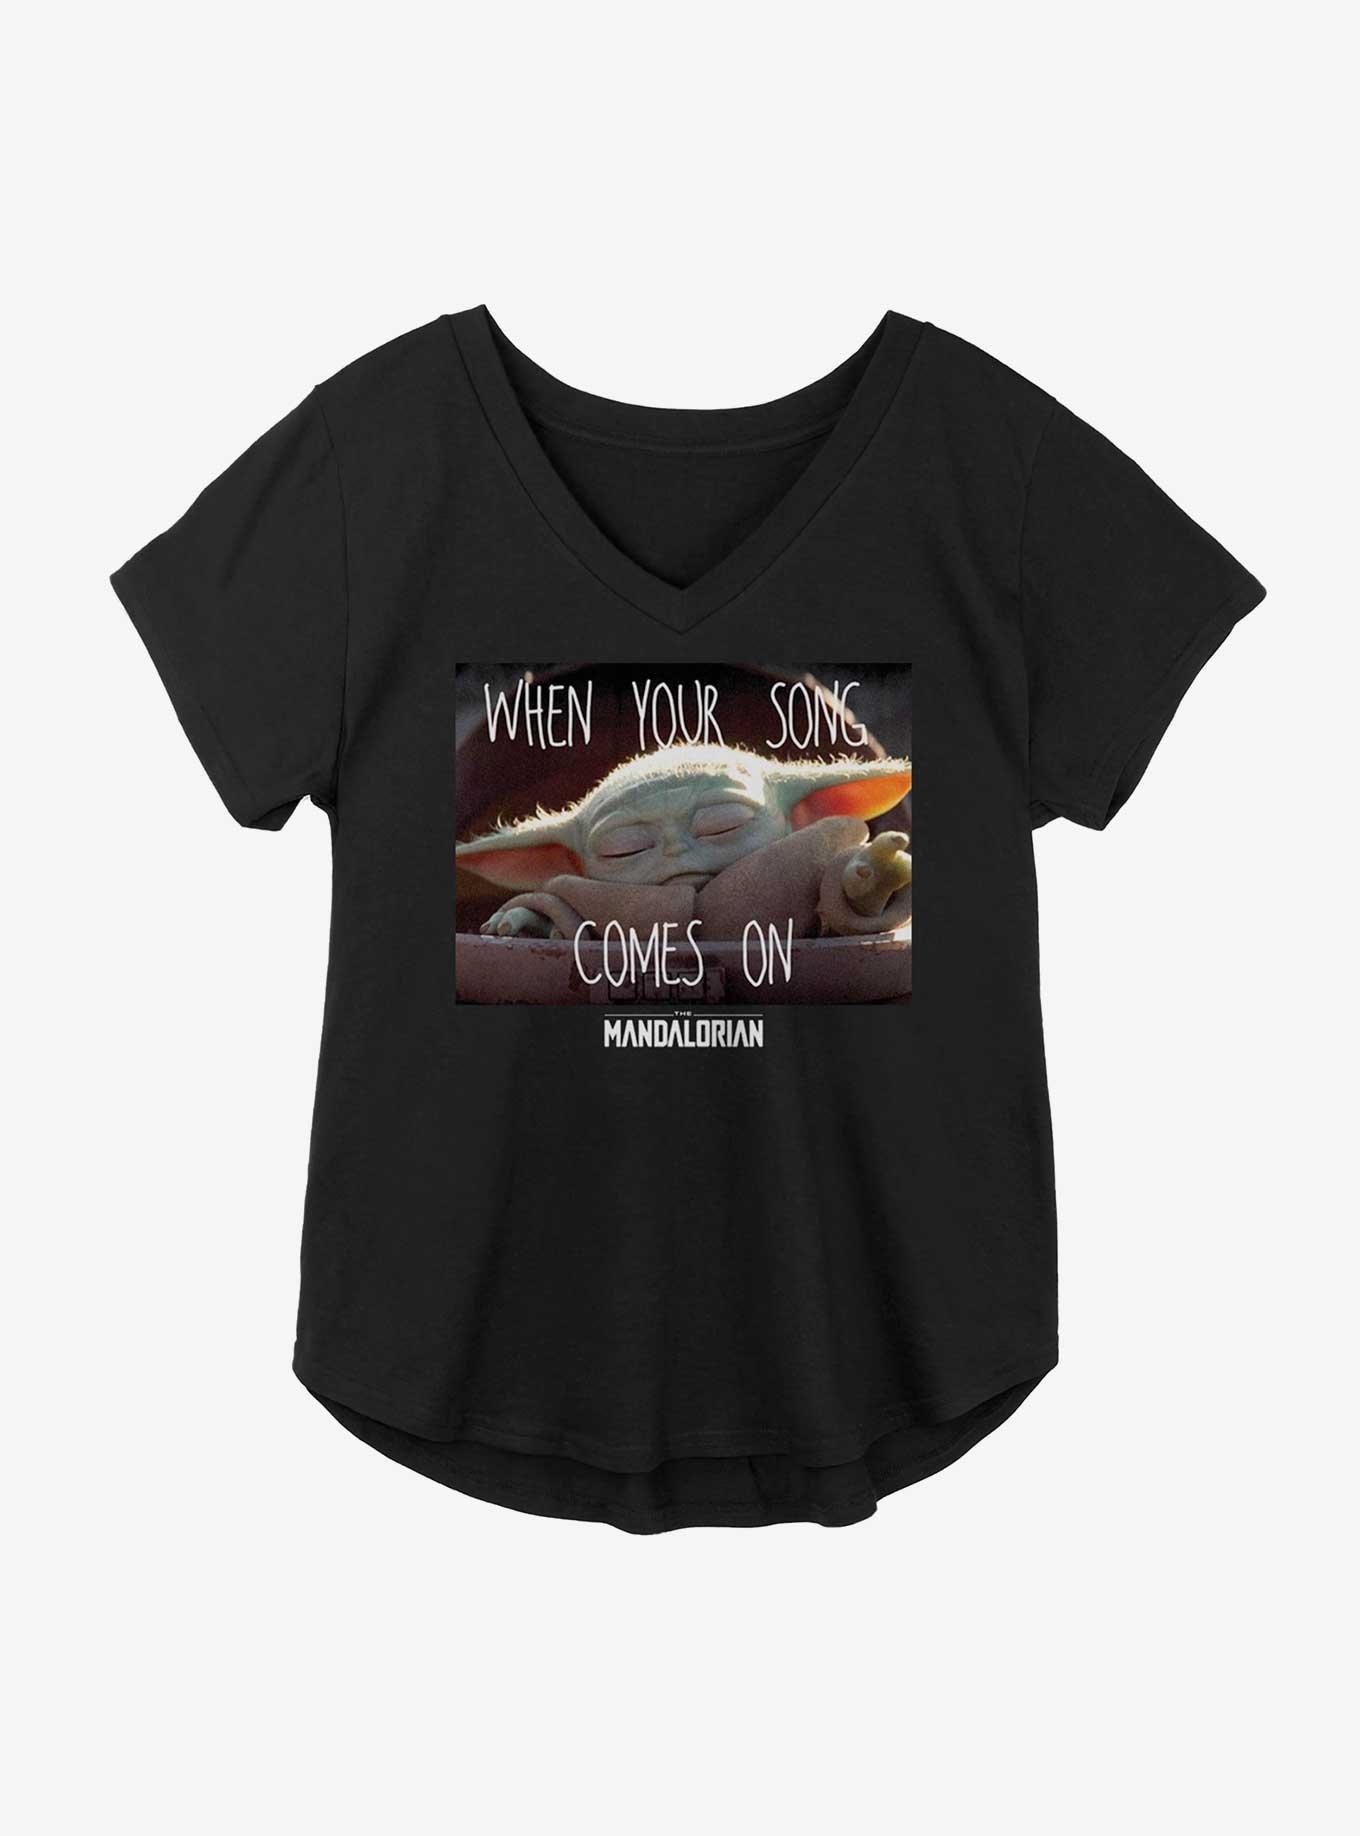 Star Wars The Mandalorian When Your Song Comes On Meme Girls Plus Size T-Shirt, BLACK, hi-res